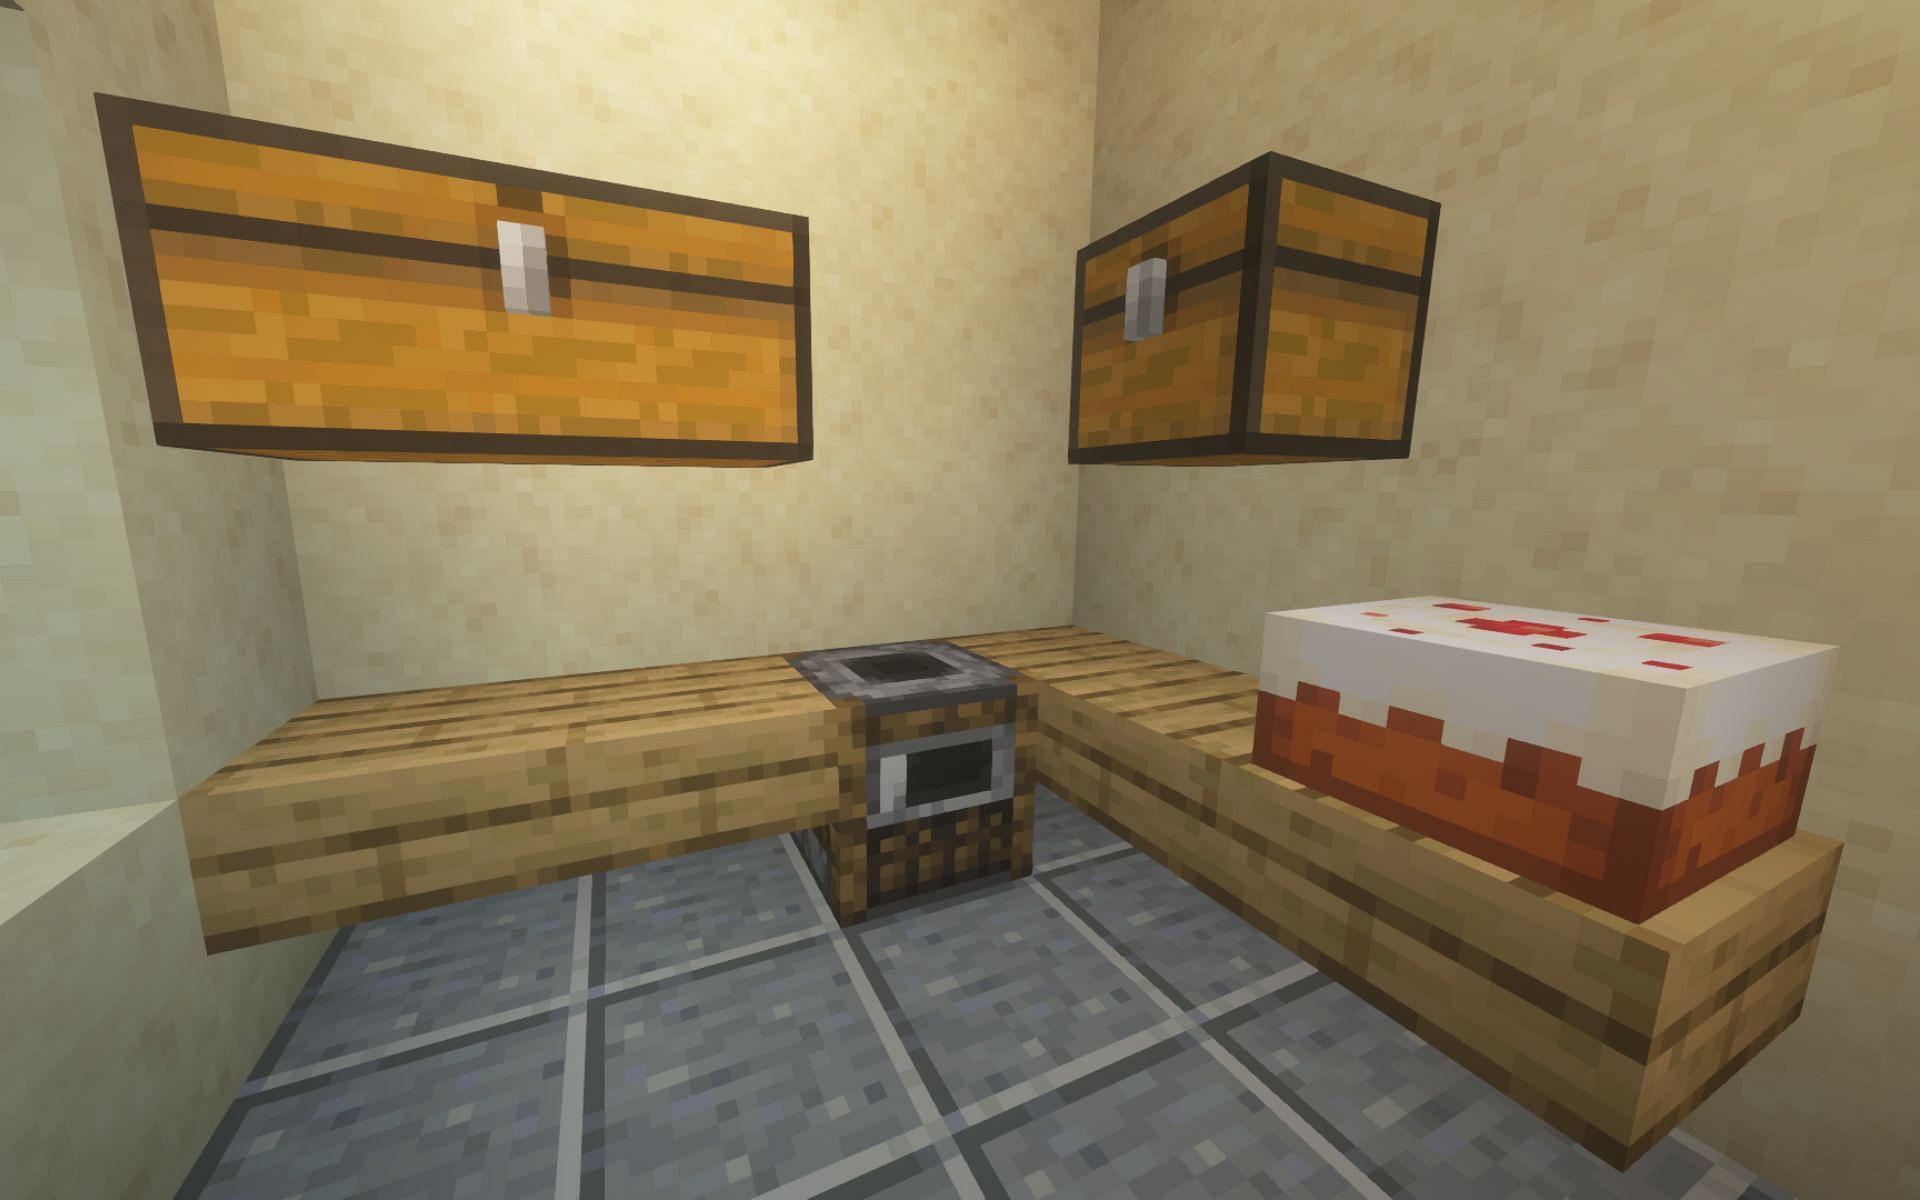 A simple kitchen with smoker, cake, and chests to store food items (Image via Minecraft 1.19 update)